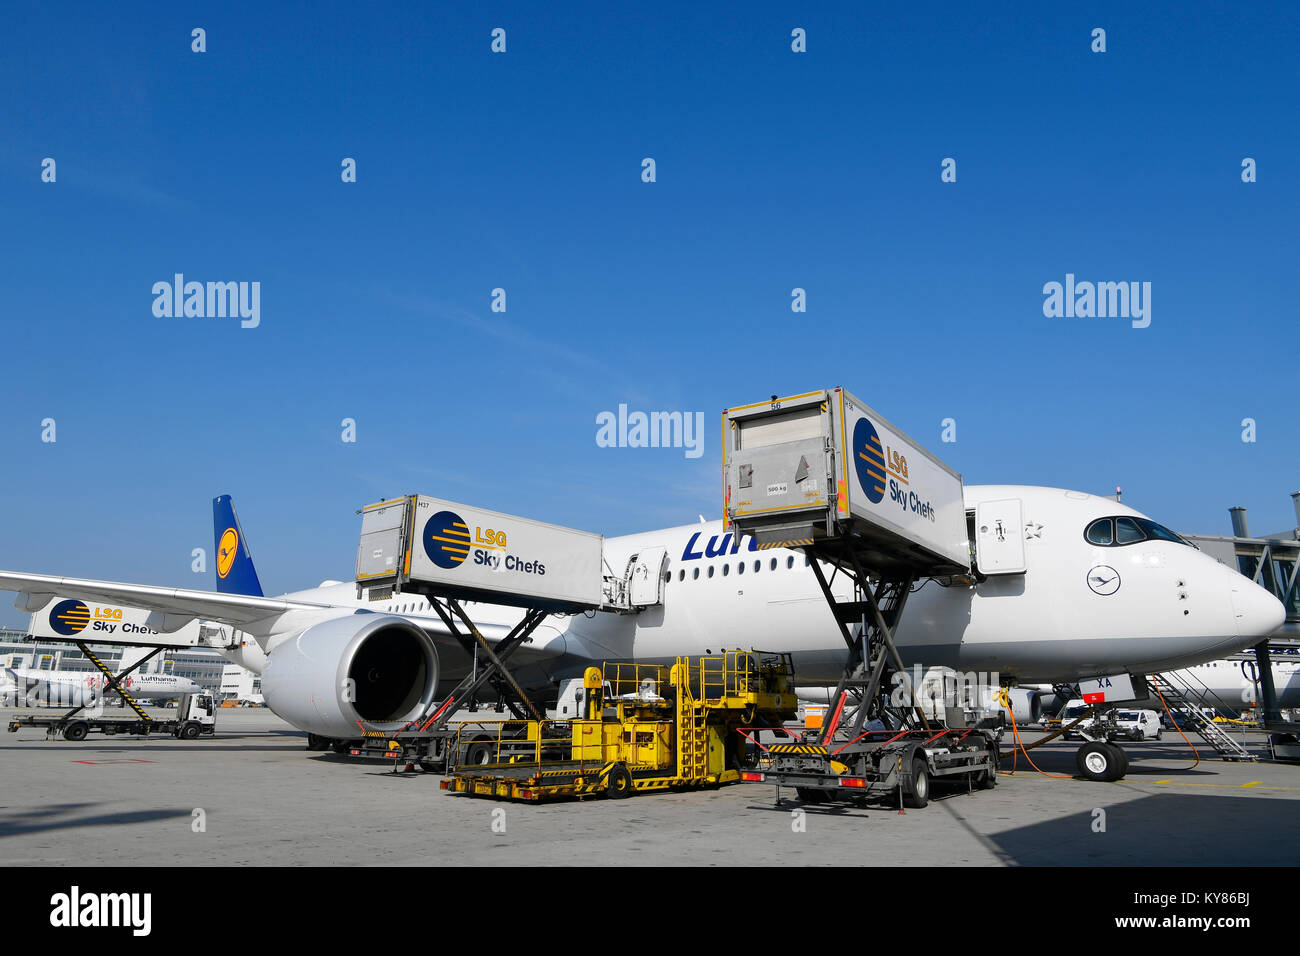 Lufthansa, Airbus, A350-900, aircraft, airplane, plane, airlines, airways, roll, in, out,  take of, start, Push, Ramp, Munich Airport, Stock Photo